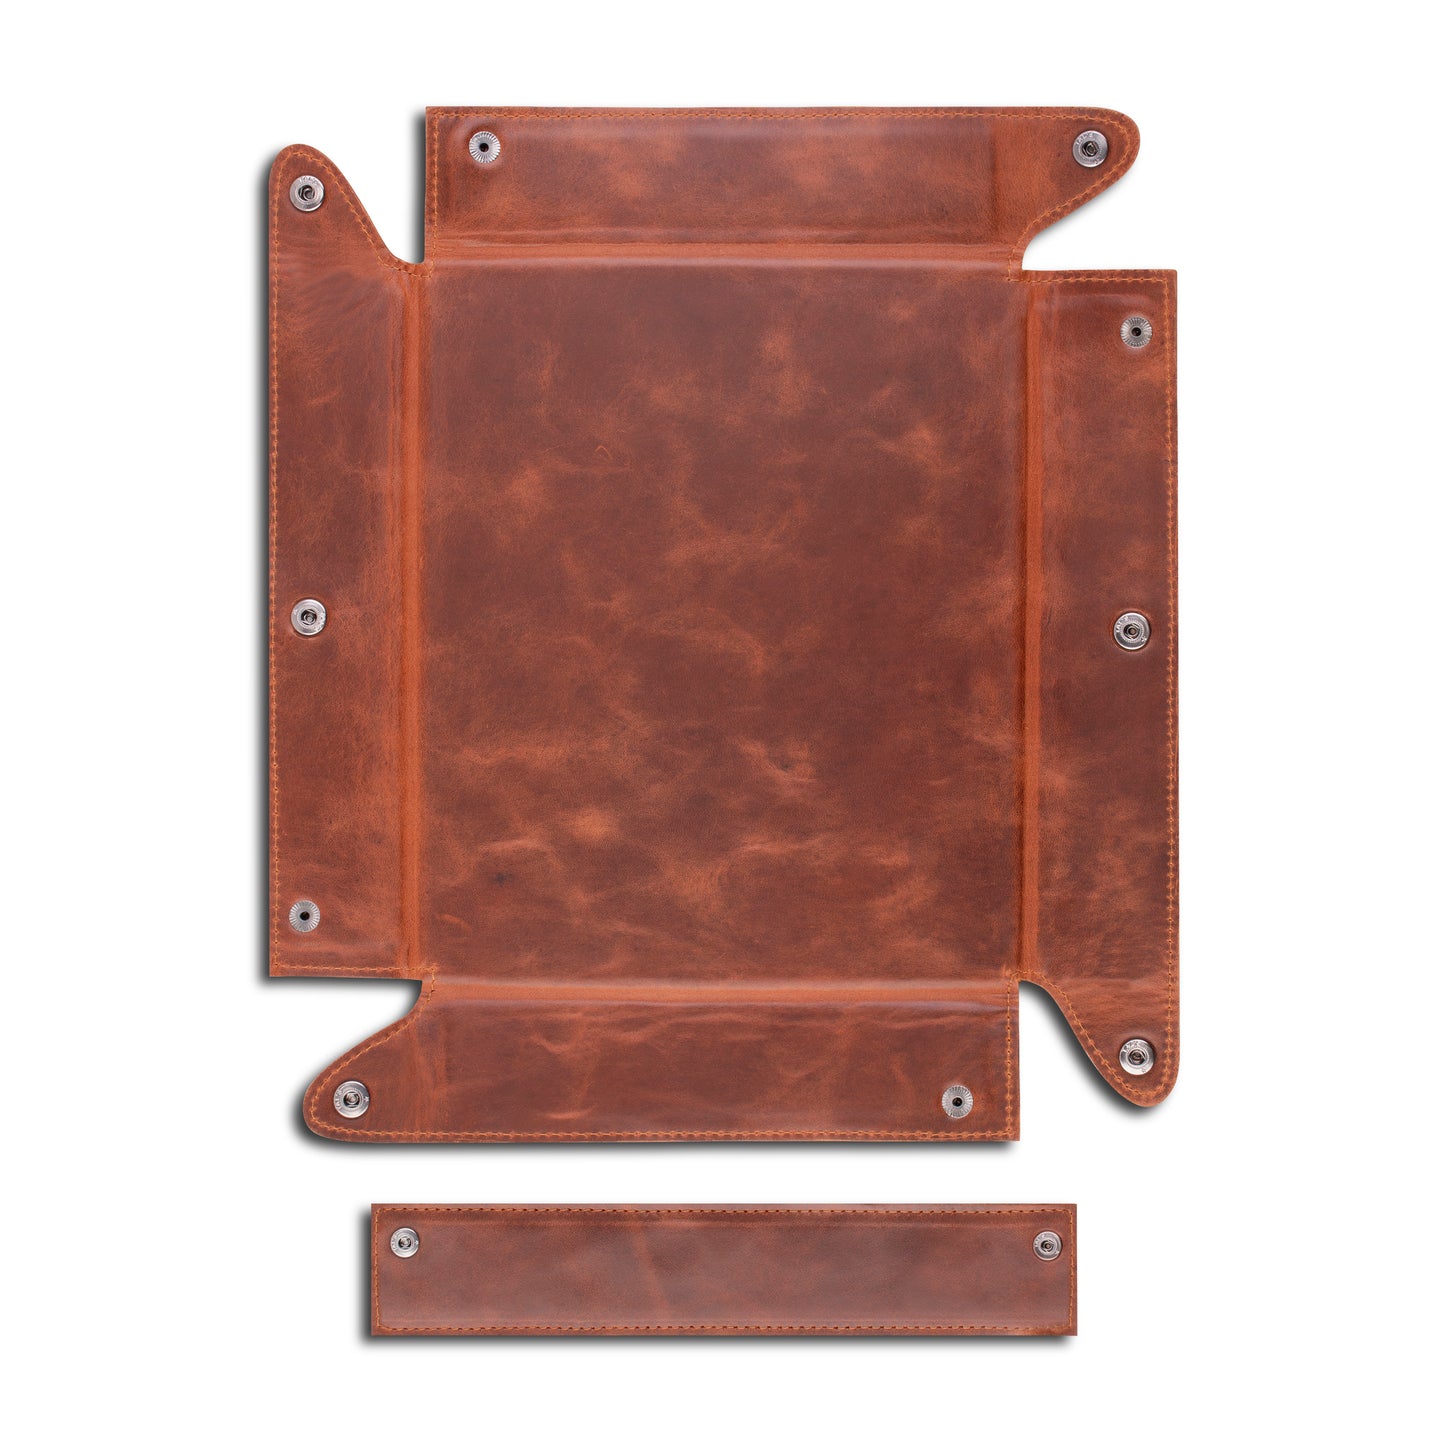 Full Leather Tray - Large Deluxe